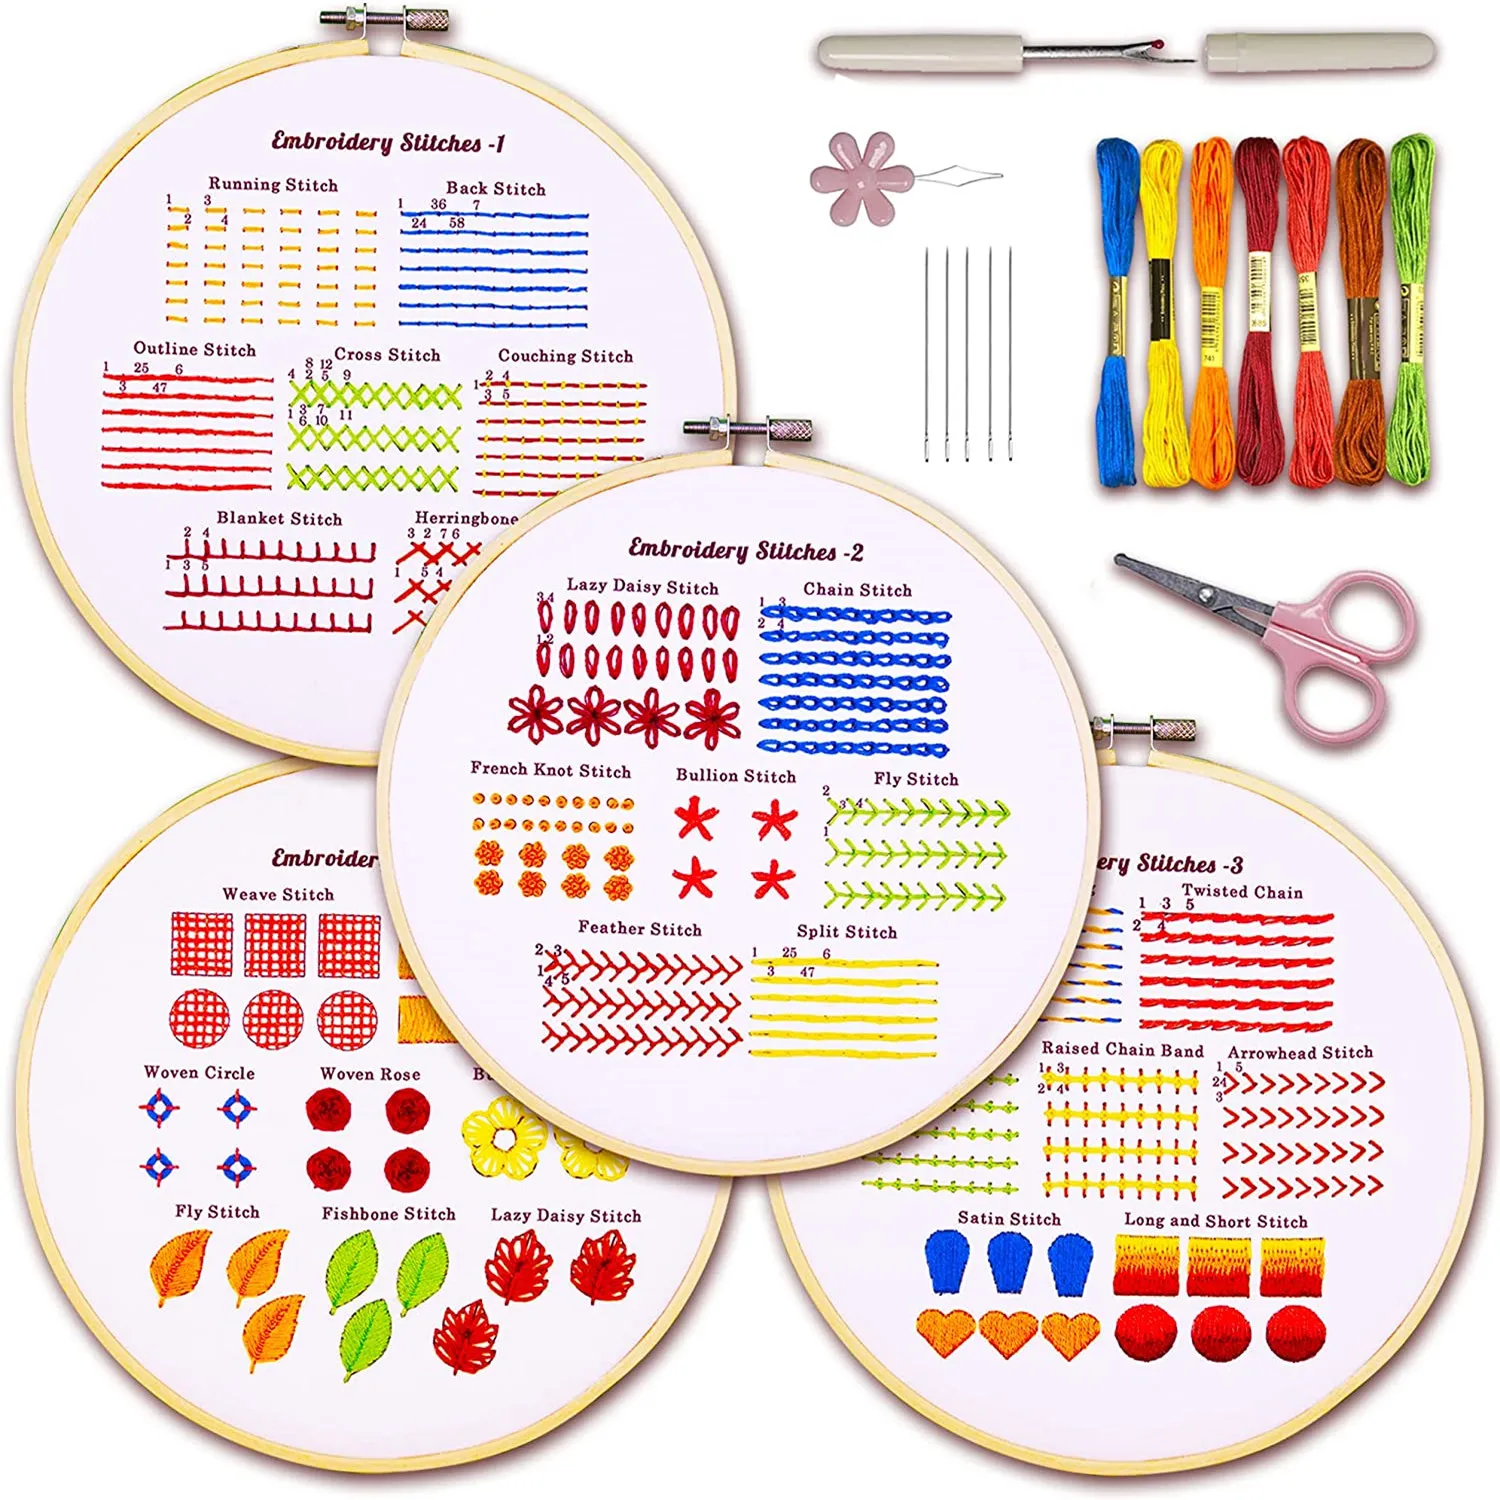 

Embroidery Stitches Practice Kit Beginners Cross Stitch Patterns Handy Sewing Hand Embroidery Starter Kits Adults Diy Art Craft